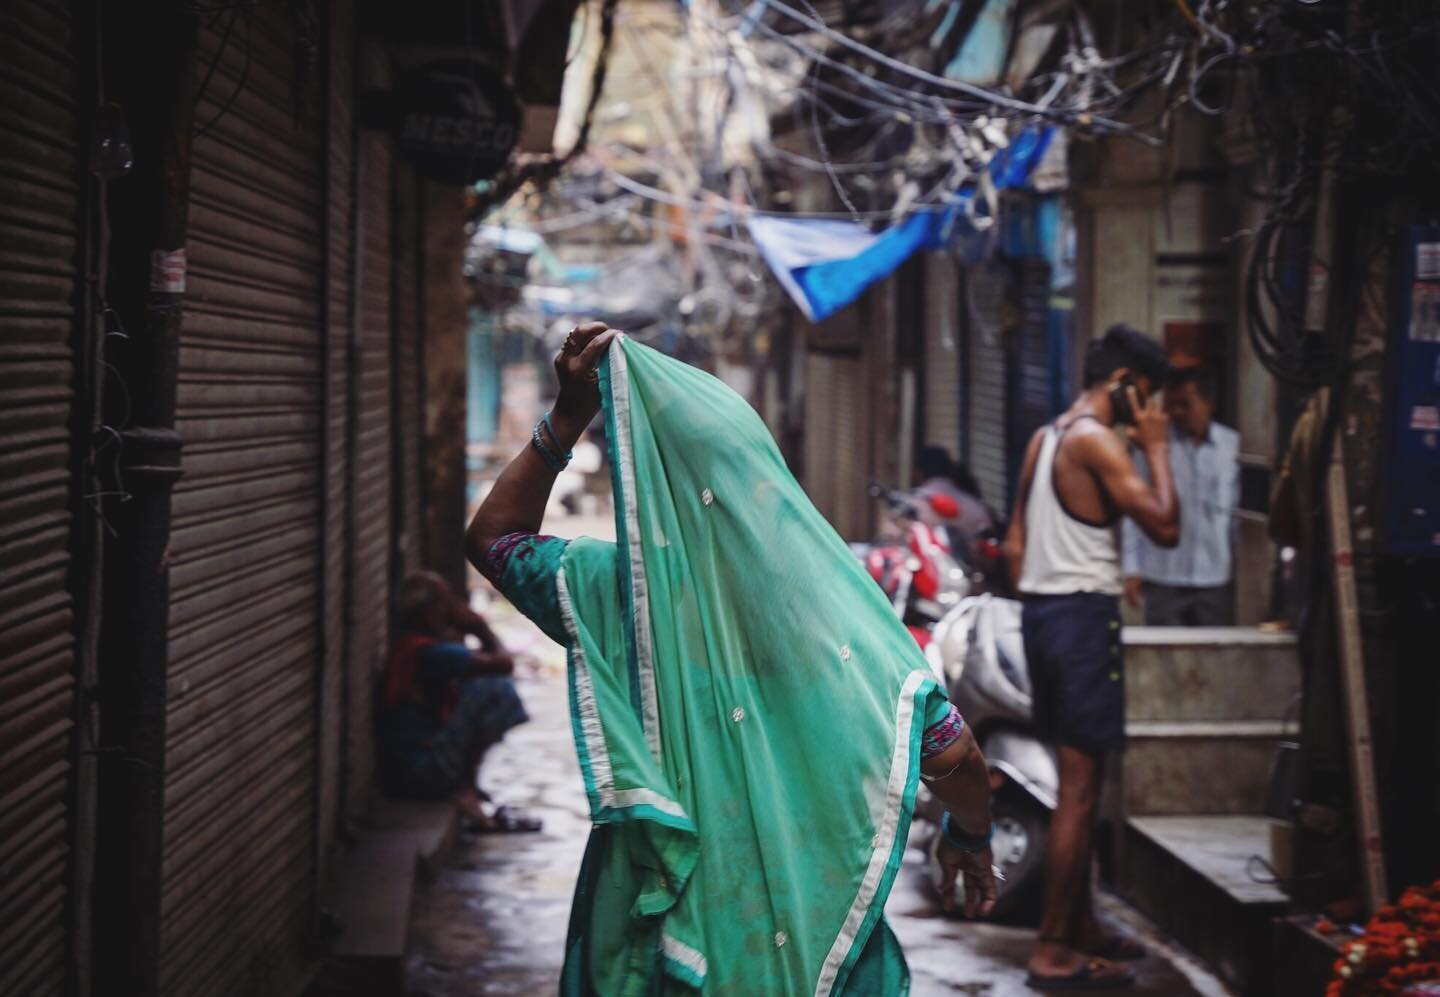 I wandered the streets of Old Delhi early in the morning, while everyone went about their morning routine, and before it got too hot. This lady was headed to the temple for her morning prayers. She was probably wondering what the heck I was doing the